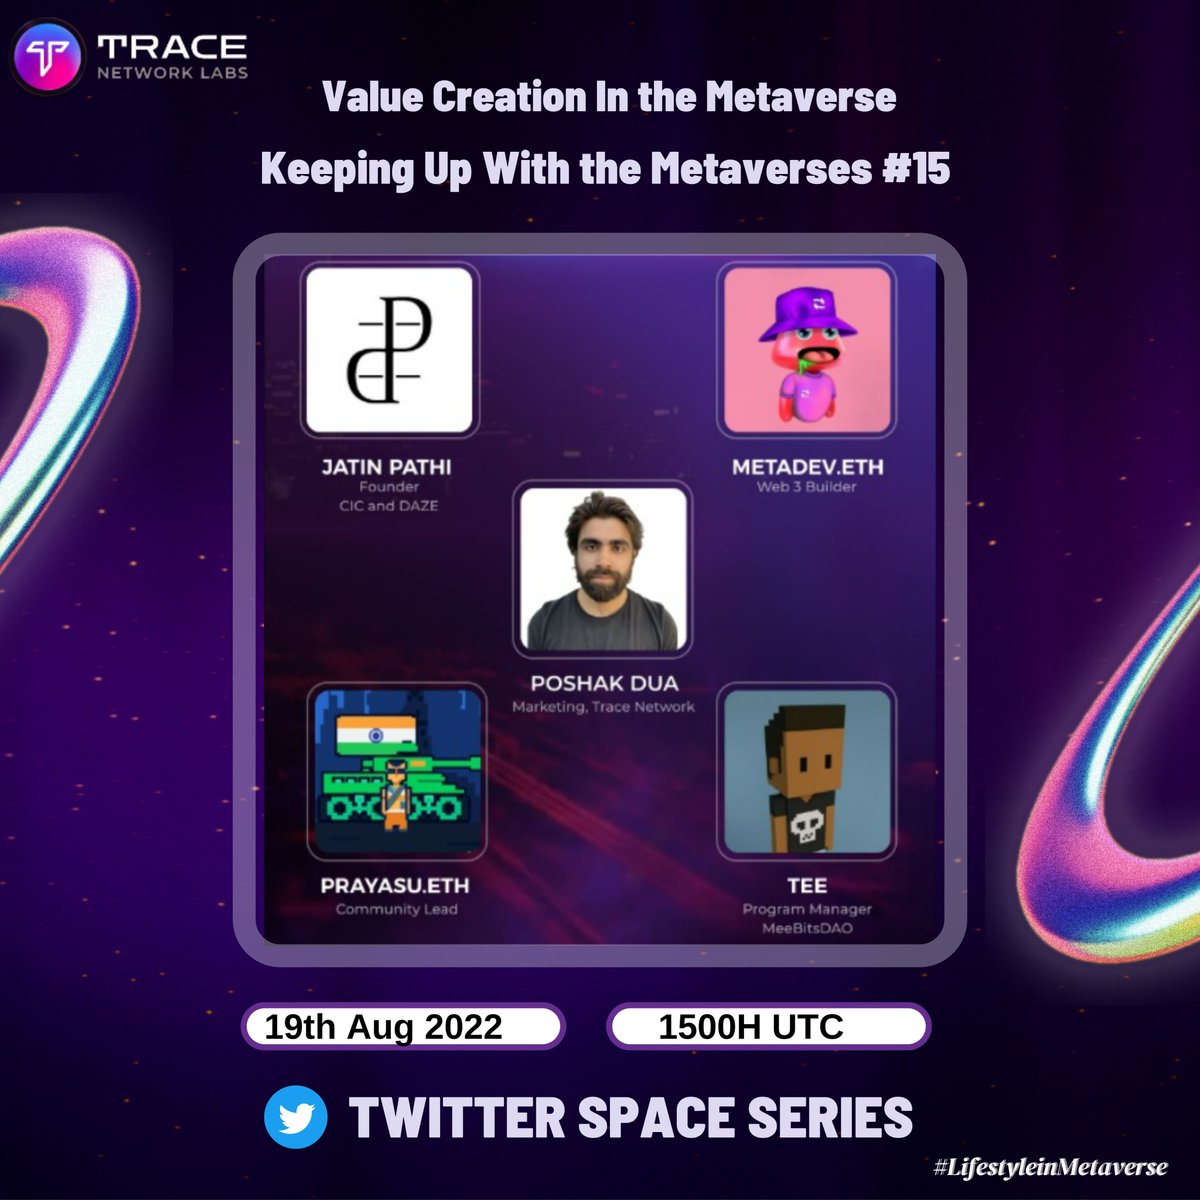 ⏰SET YOUR REMINDERS FOR THE METAVERSE !!

On the weekly discussion today i.e 19th of Aug at 3PM UTC, about "Value Creation In The #Metaverse"

▫️Venue:

#LifestyleInMetaverse #Spaces #Avatars  